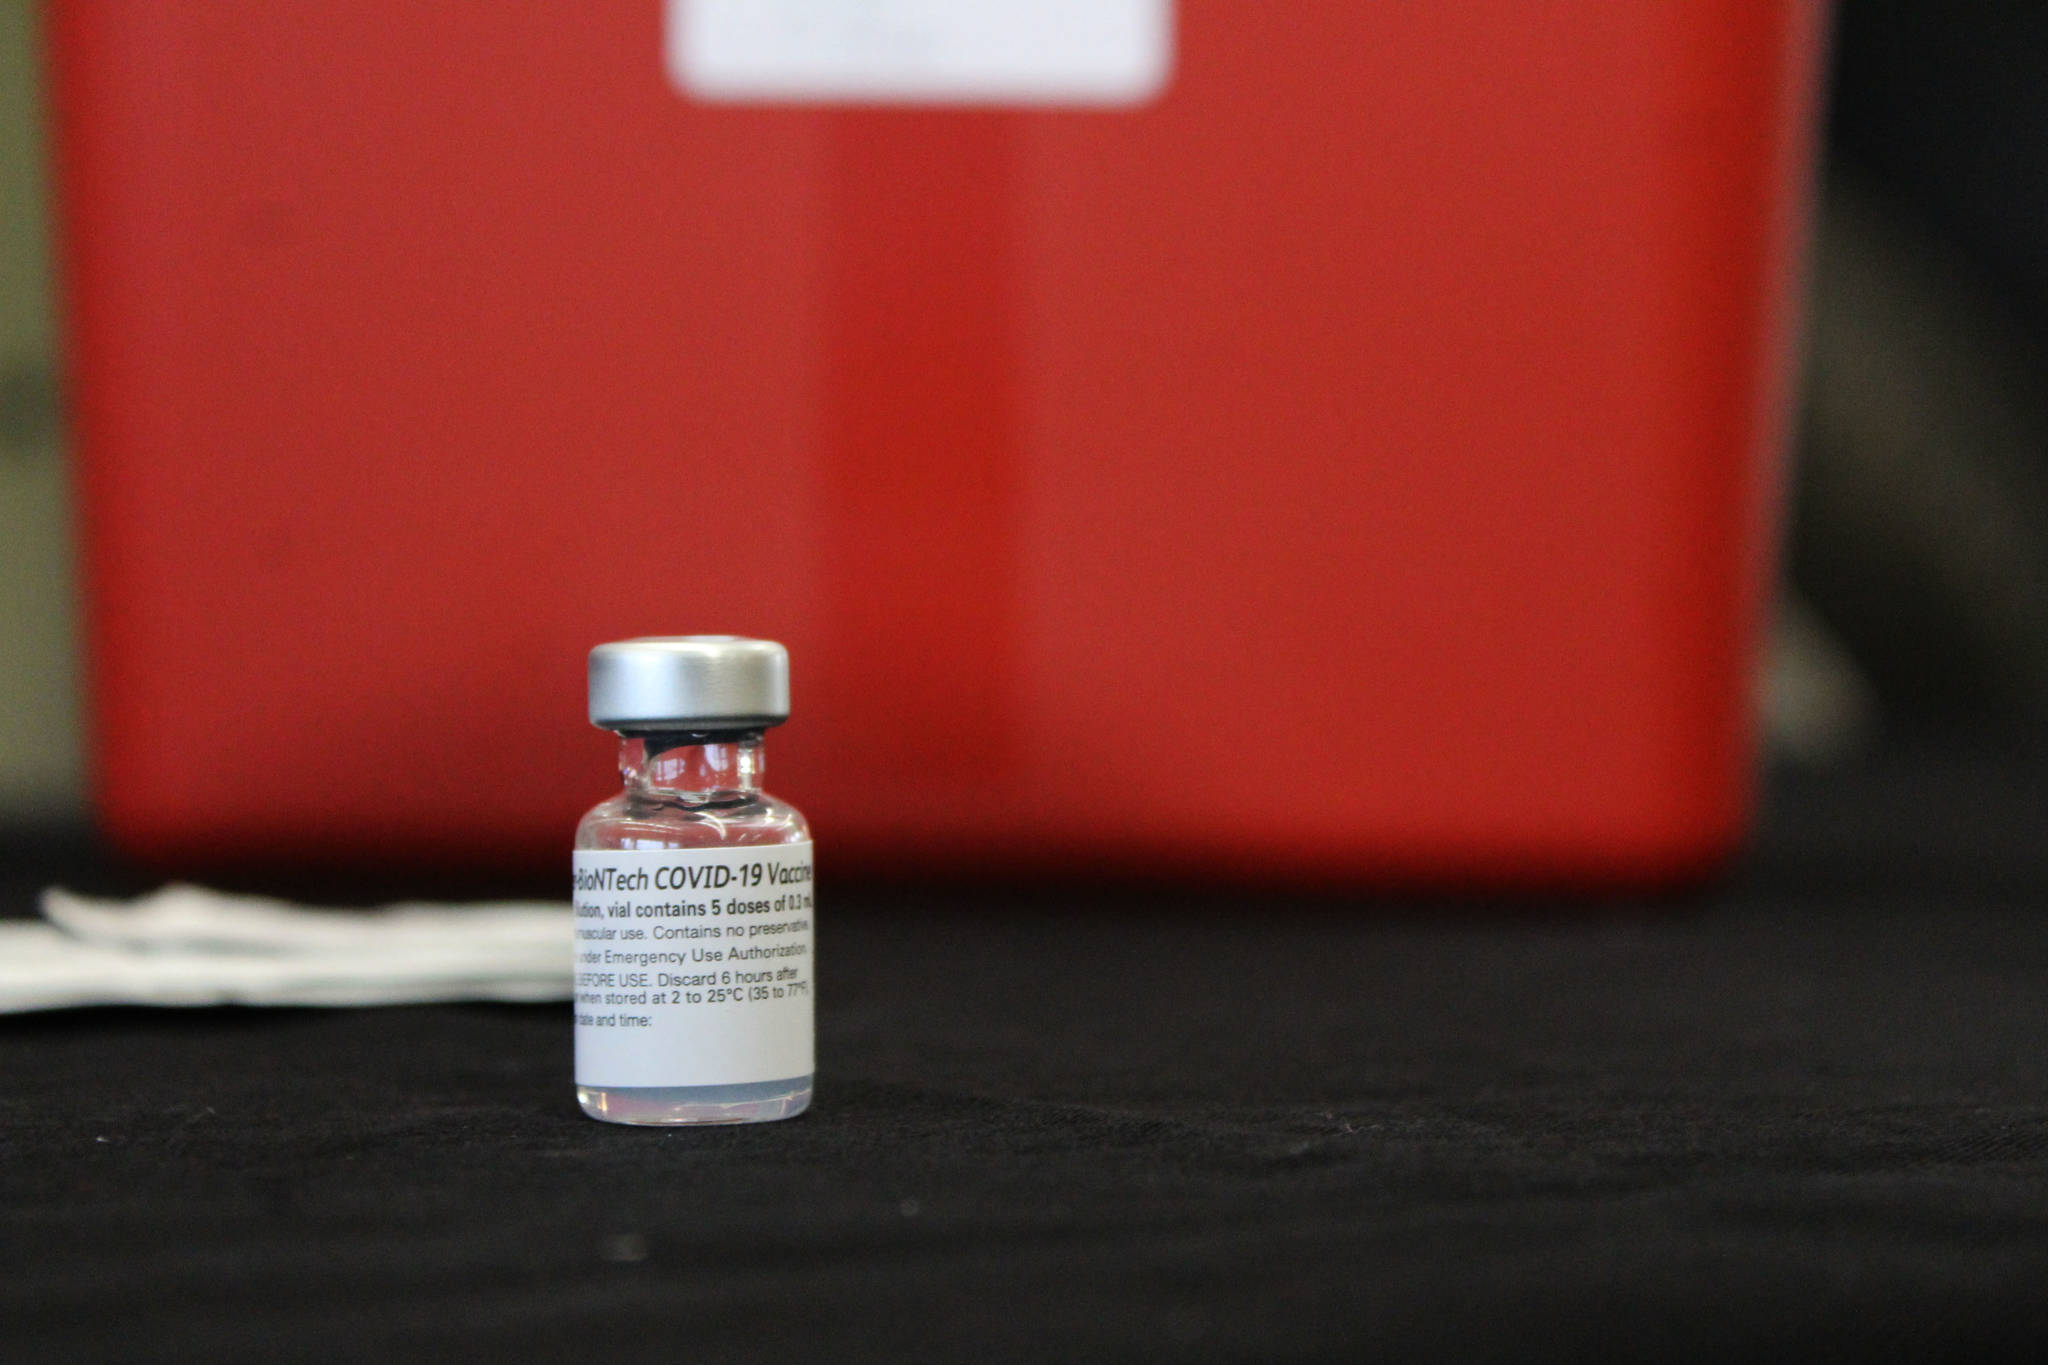 A vial of Pfizer’s COVID-19 vaccine is seen at Central Emergency Services Station 1 on Friday, Dec. 18, 2020 in Soldotna, Alaska. (Ashlyn O’Hara/Peninsula Clarion)